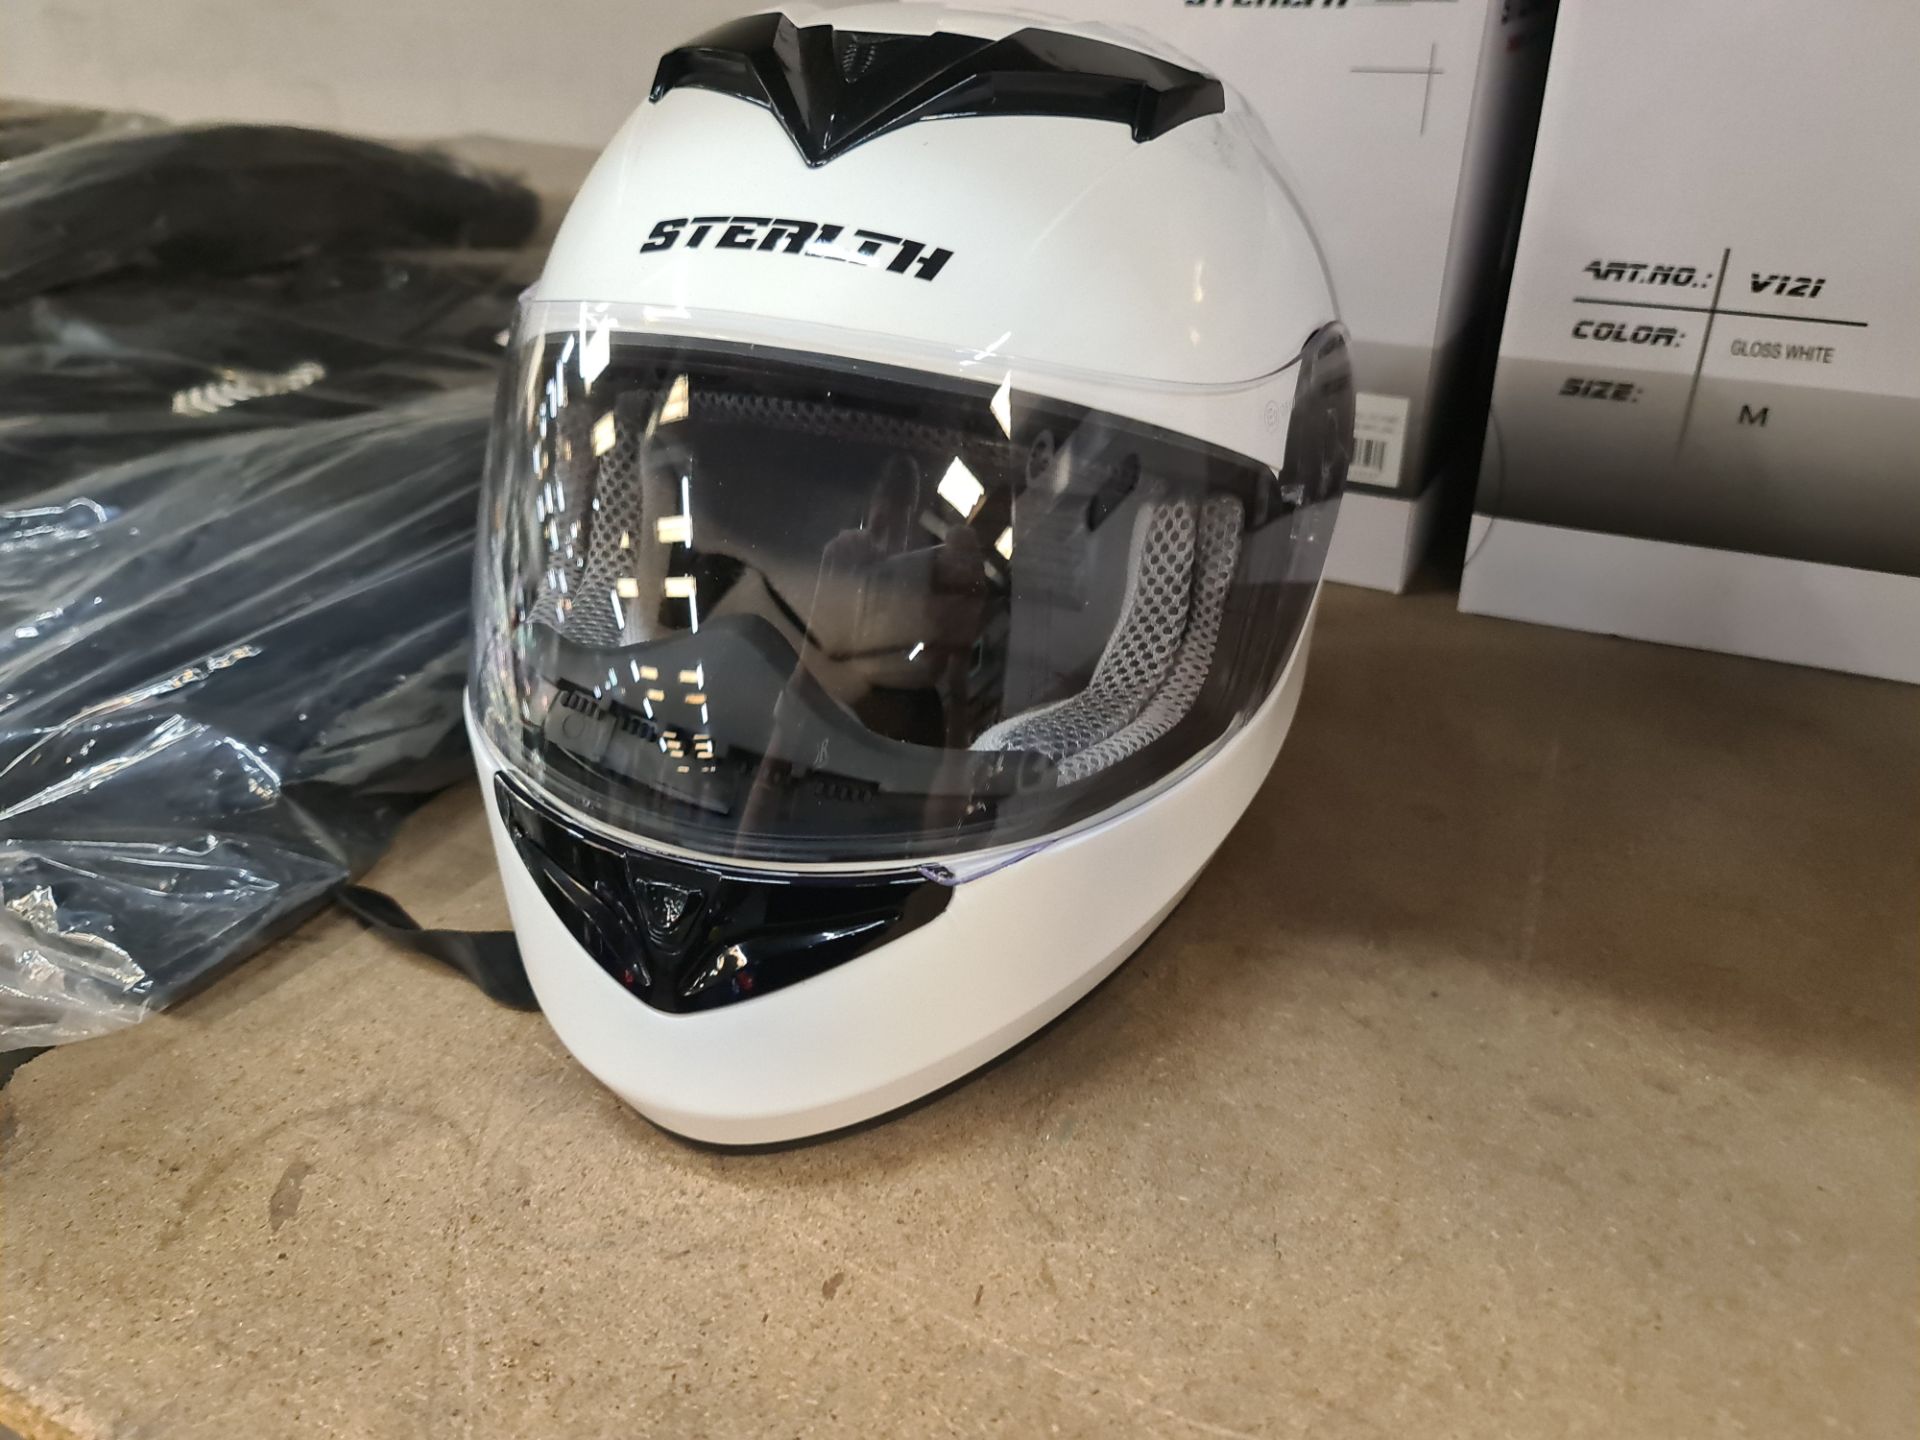 4 off Stealth V121 gloss white helmets - 1 each of S, M, L & XL - Image 2 of 8